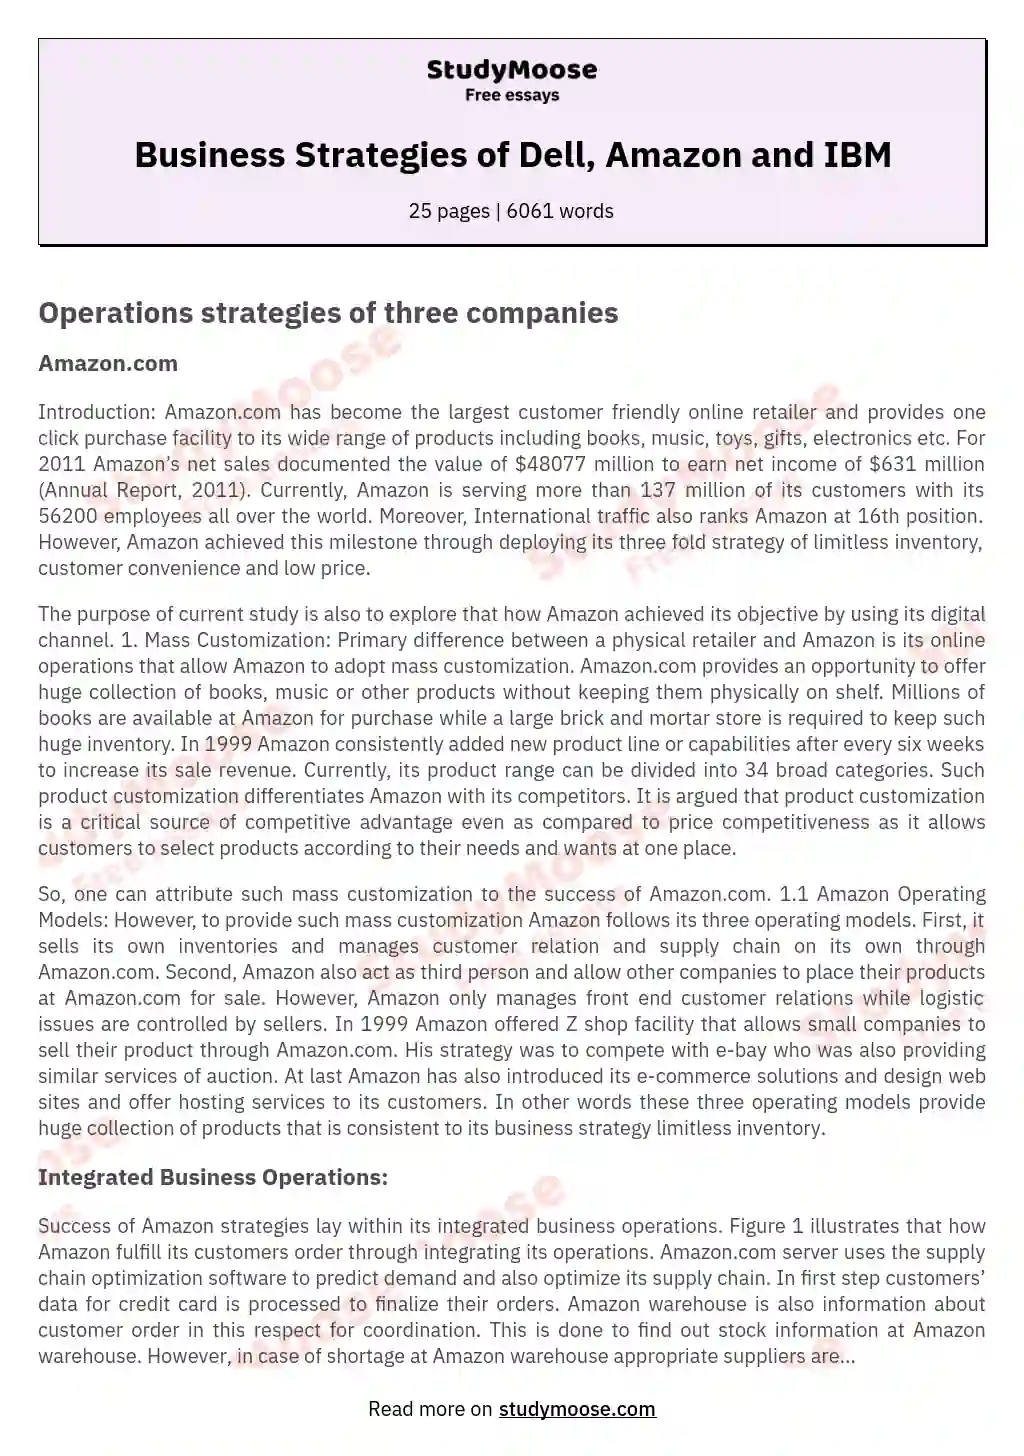 Amazon's Integrated Business Operations essay